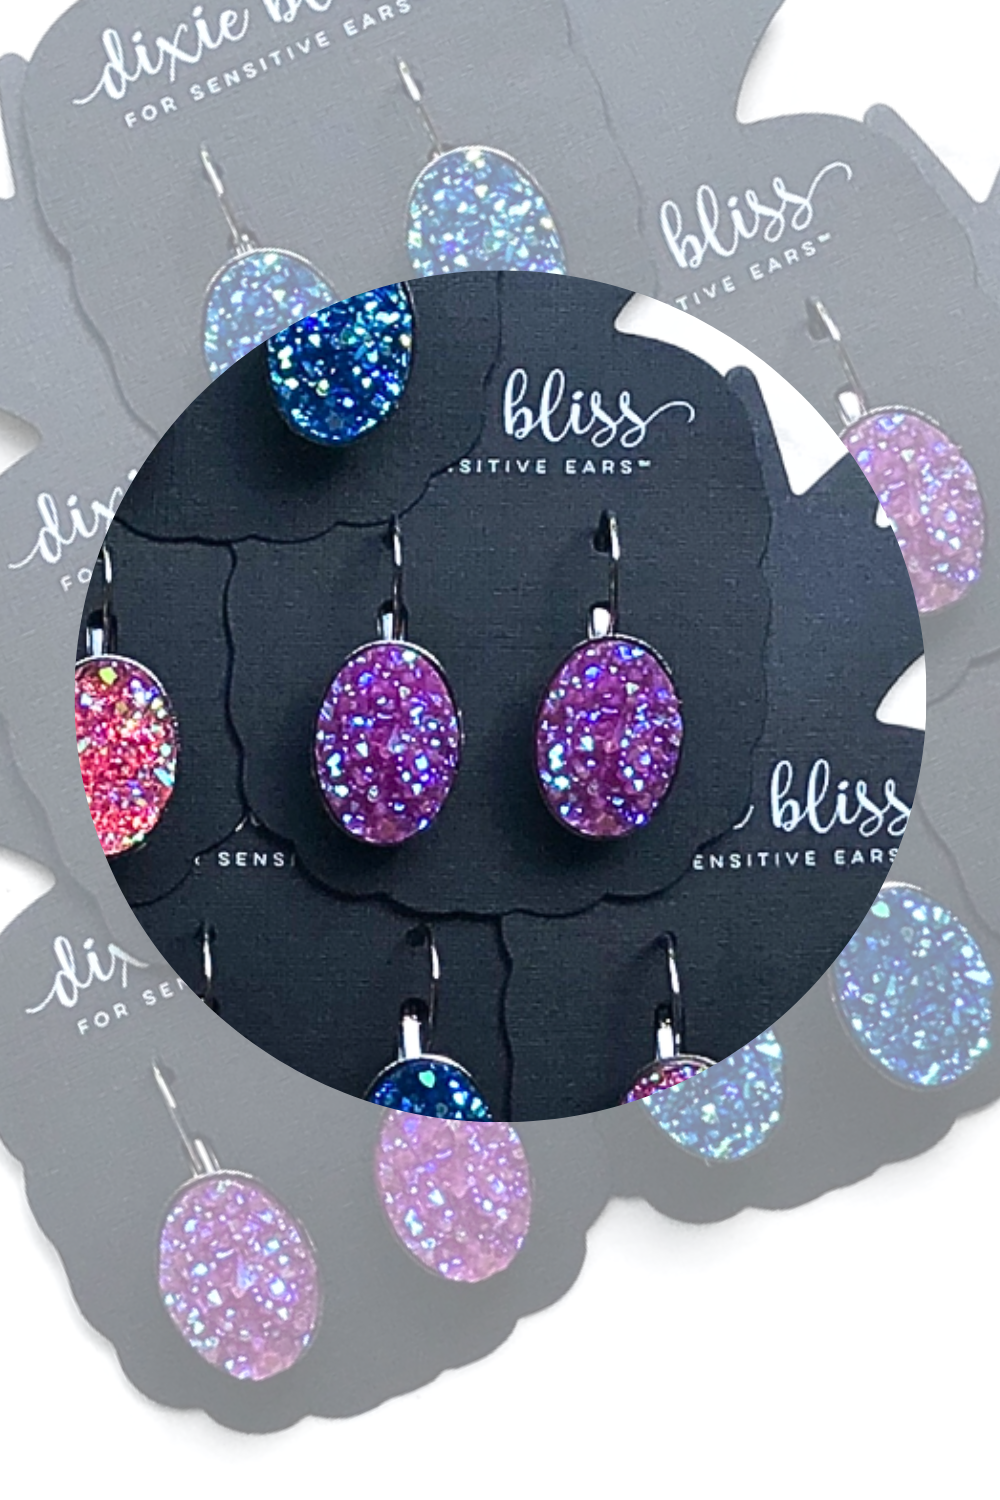 Iridescent Violet Purple | Dixie Bliss Earrings: Vivid Lever Backs In Blue, Pink, and Purple. All Hypoallergenic made in the USA woman-owned company druzy shiny diamond-like sparkle and shine safe & made for sensitive ears